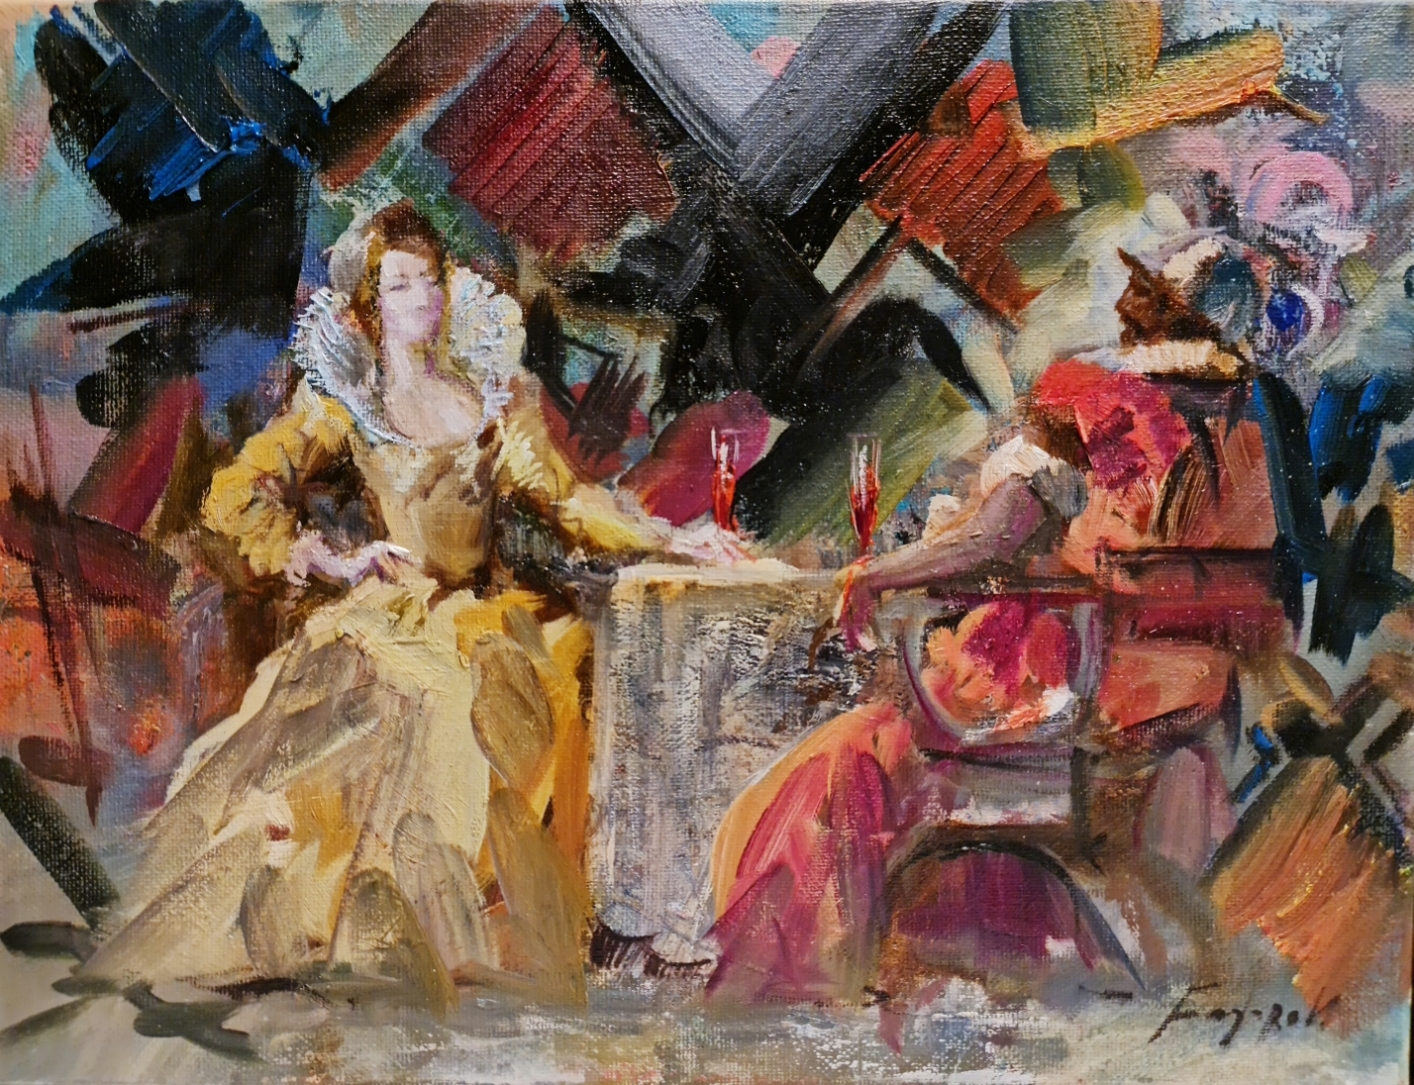 Realism and Abstraction in the Work of Oleg Fedorov